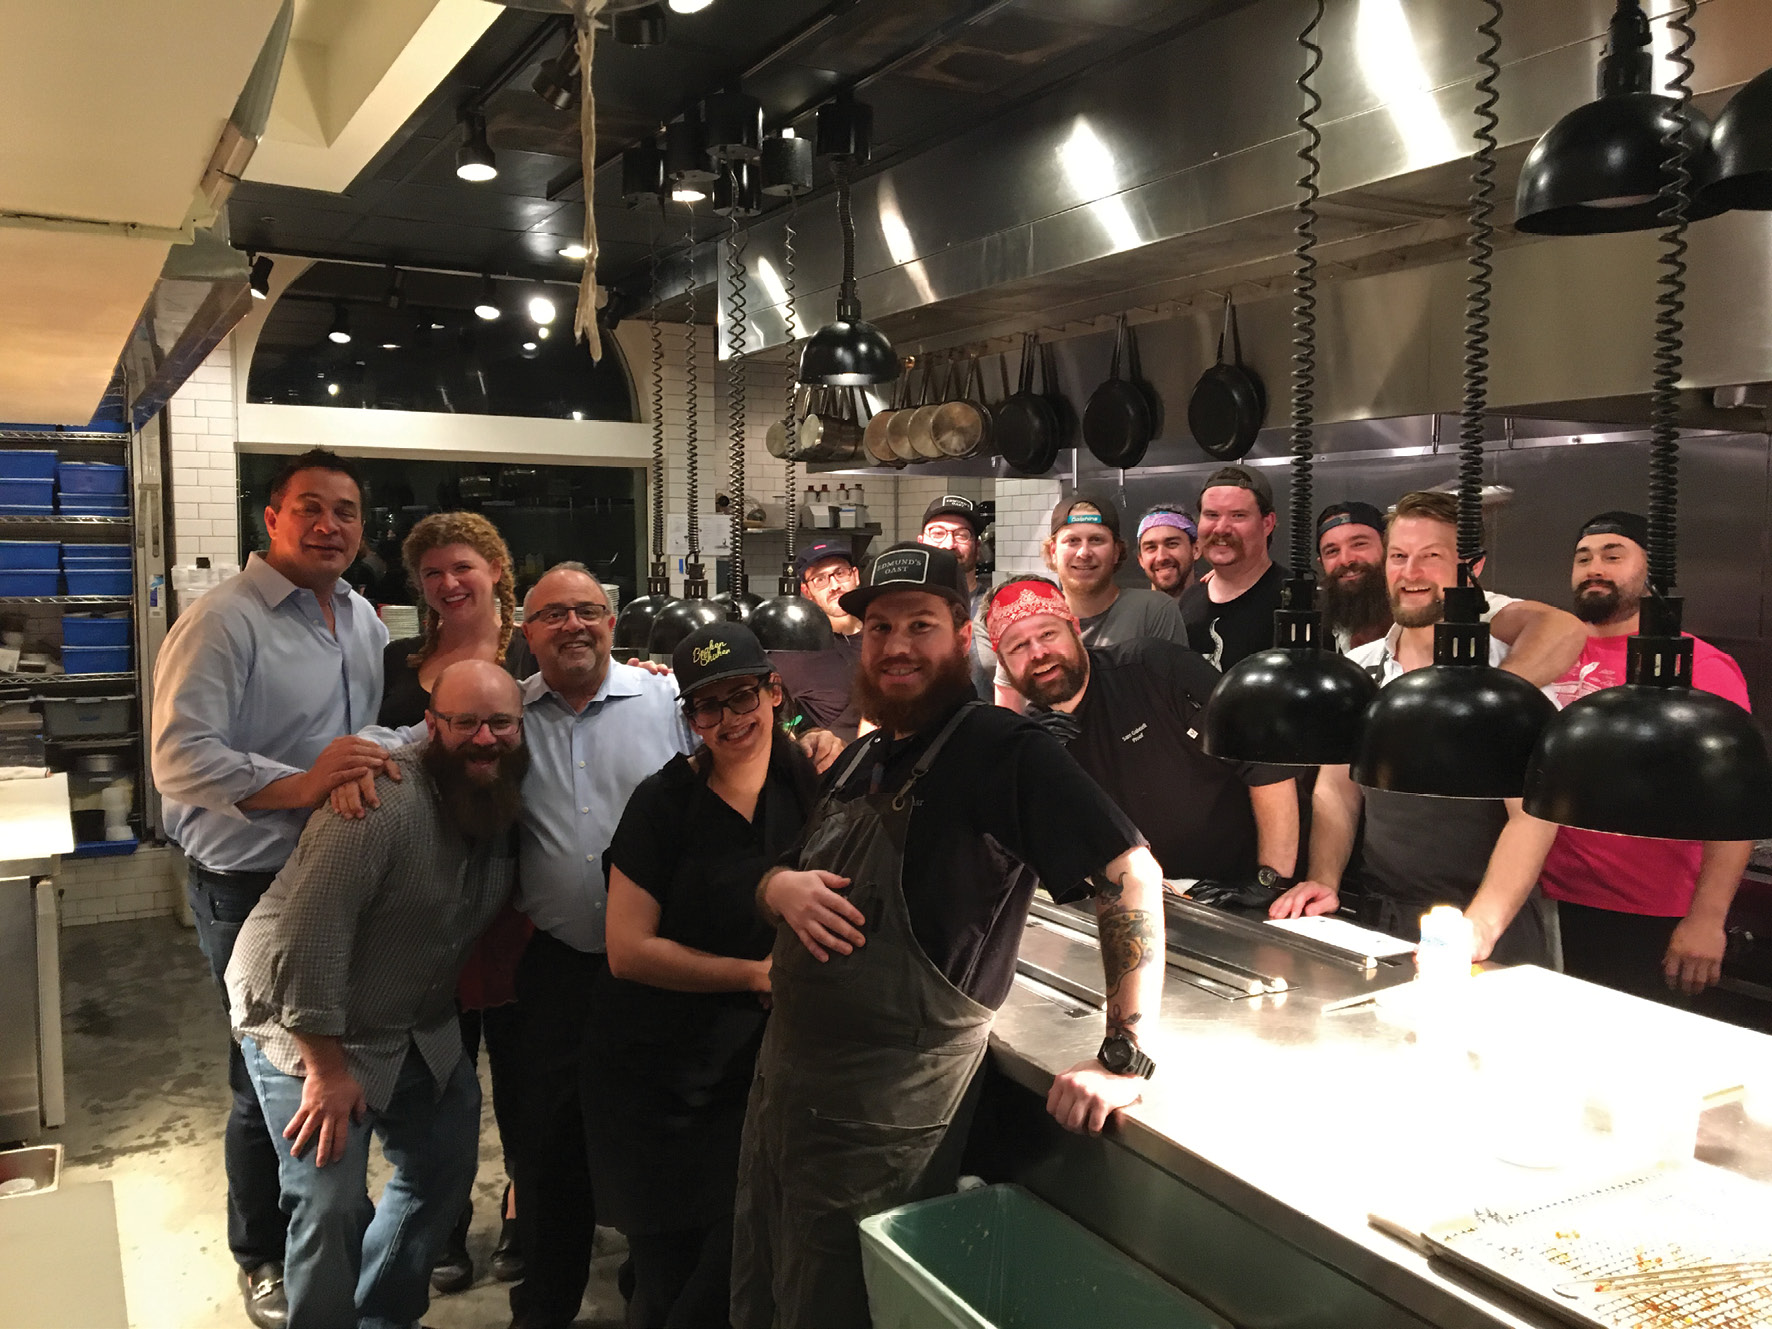 Palmer and Bakst with the F&amp;B crew who worked last fall’s “Switcheroo” at Edmund’s Oast to benefit Ben’s Friends